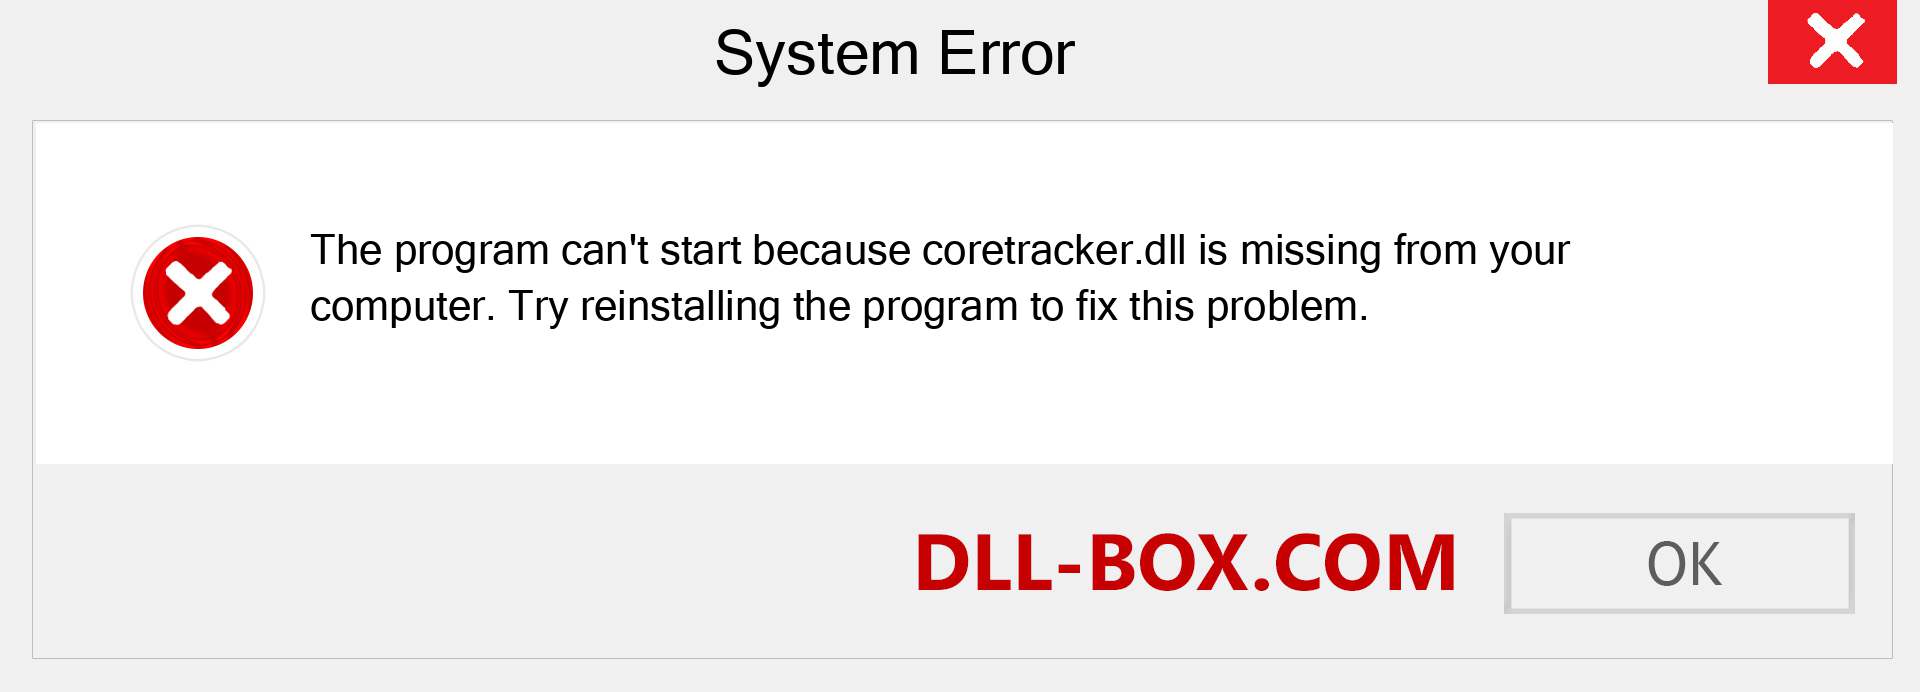  coretracker.dll file is missing?. Download for Windows 7, 8, 10 - Fix  coretracker dll Missing Error on Windows, photos, images